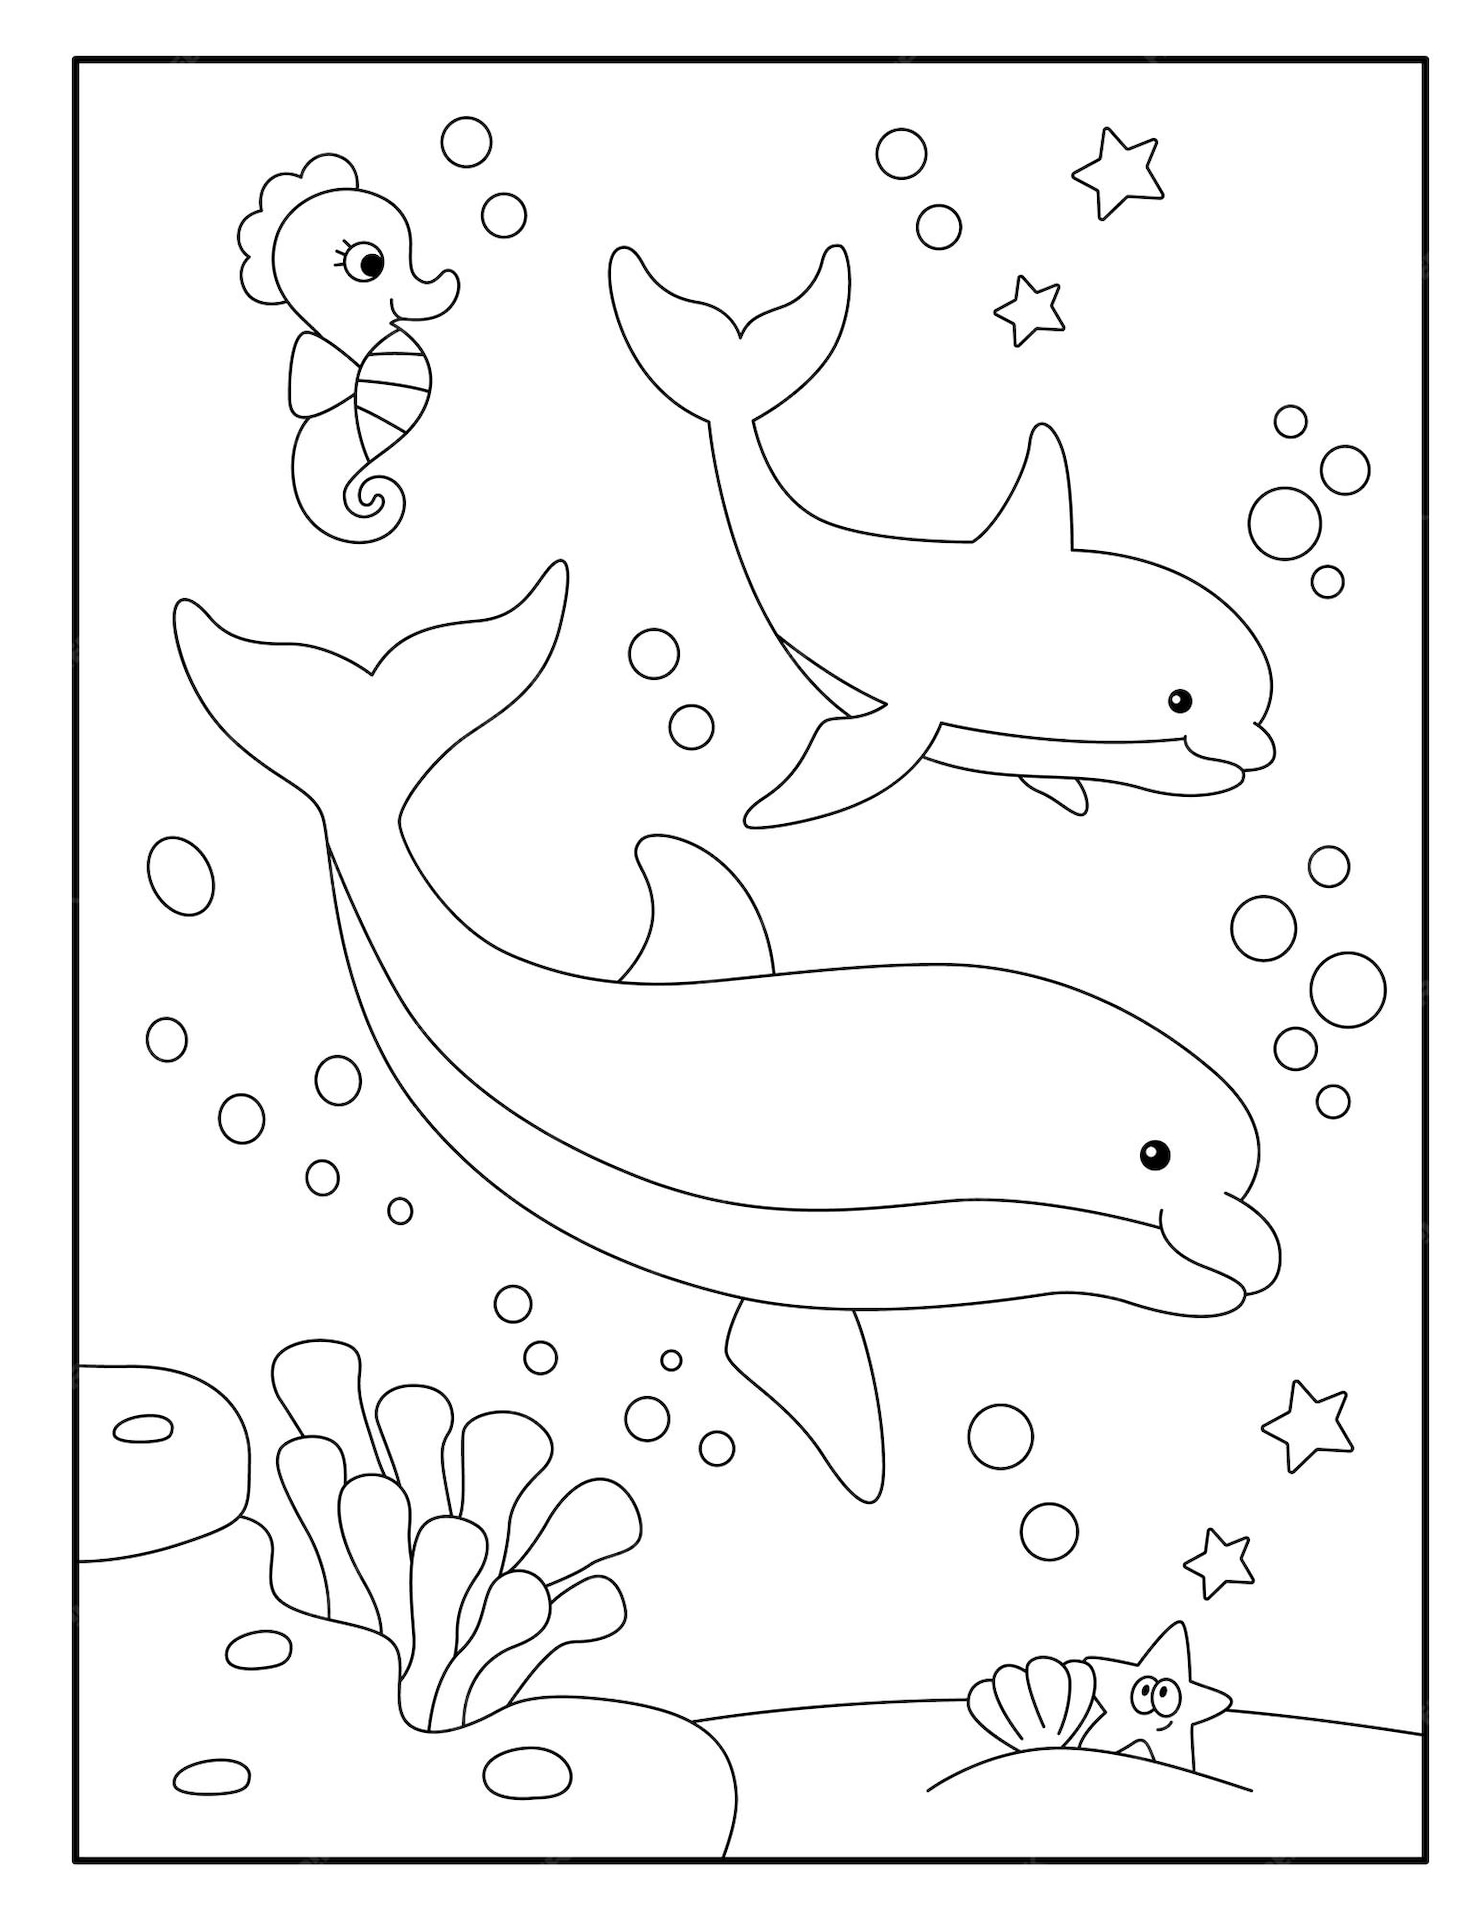 Premium Vector | Cute dolphin coloring pages for children